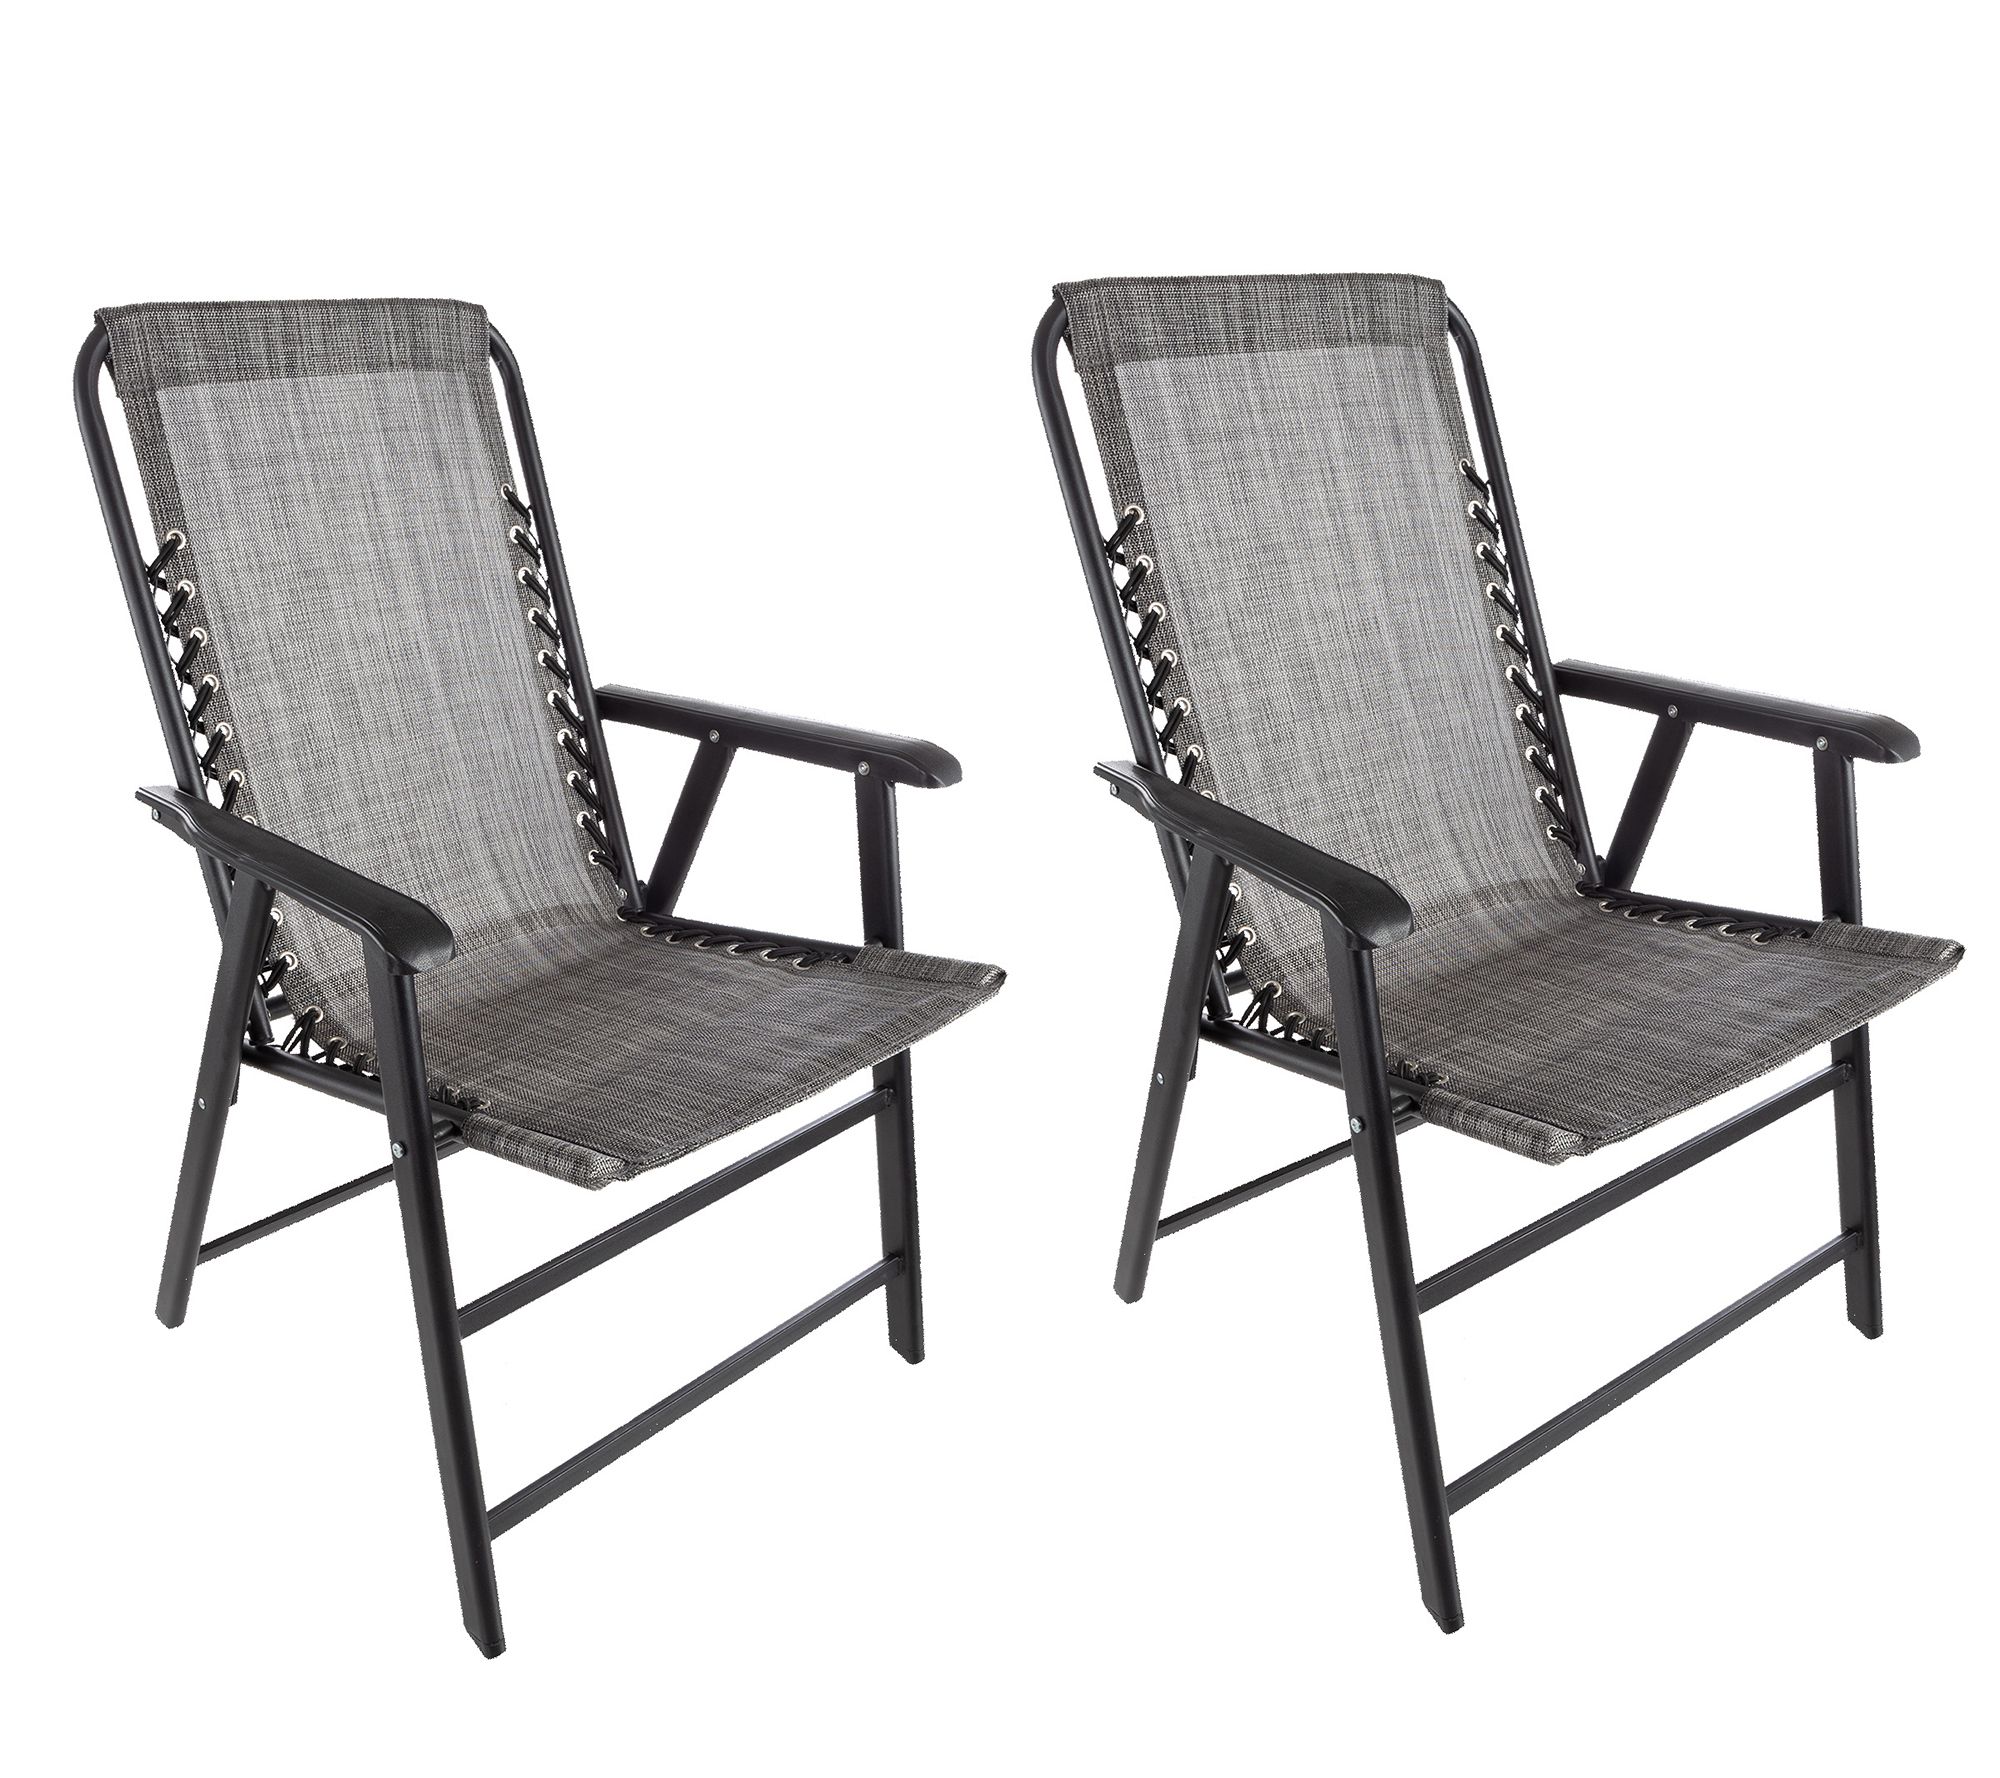 Outdoor Chairs  Camping Chairs & Beach Chairs 